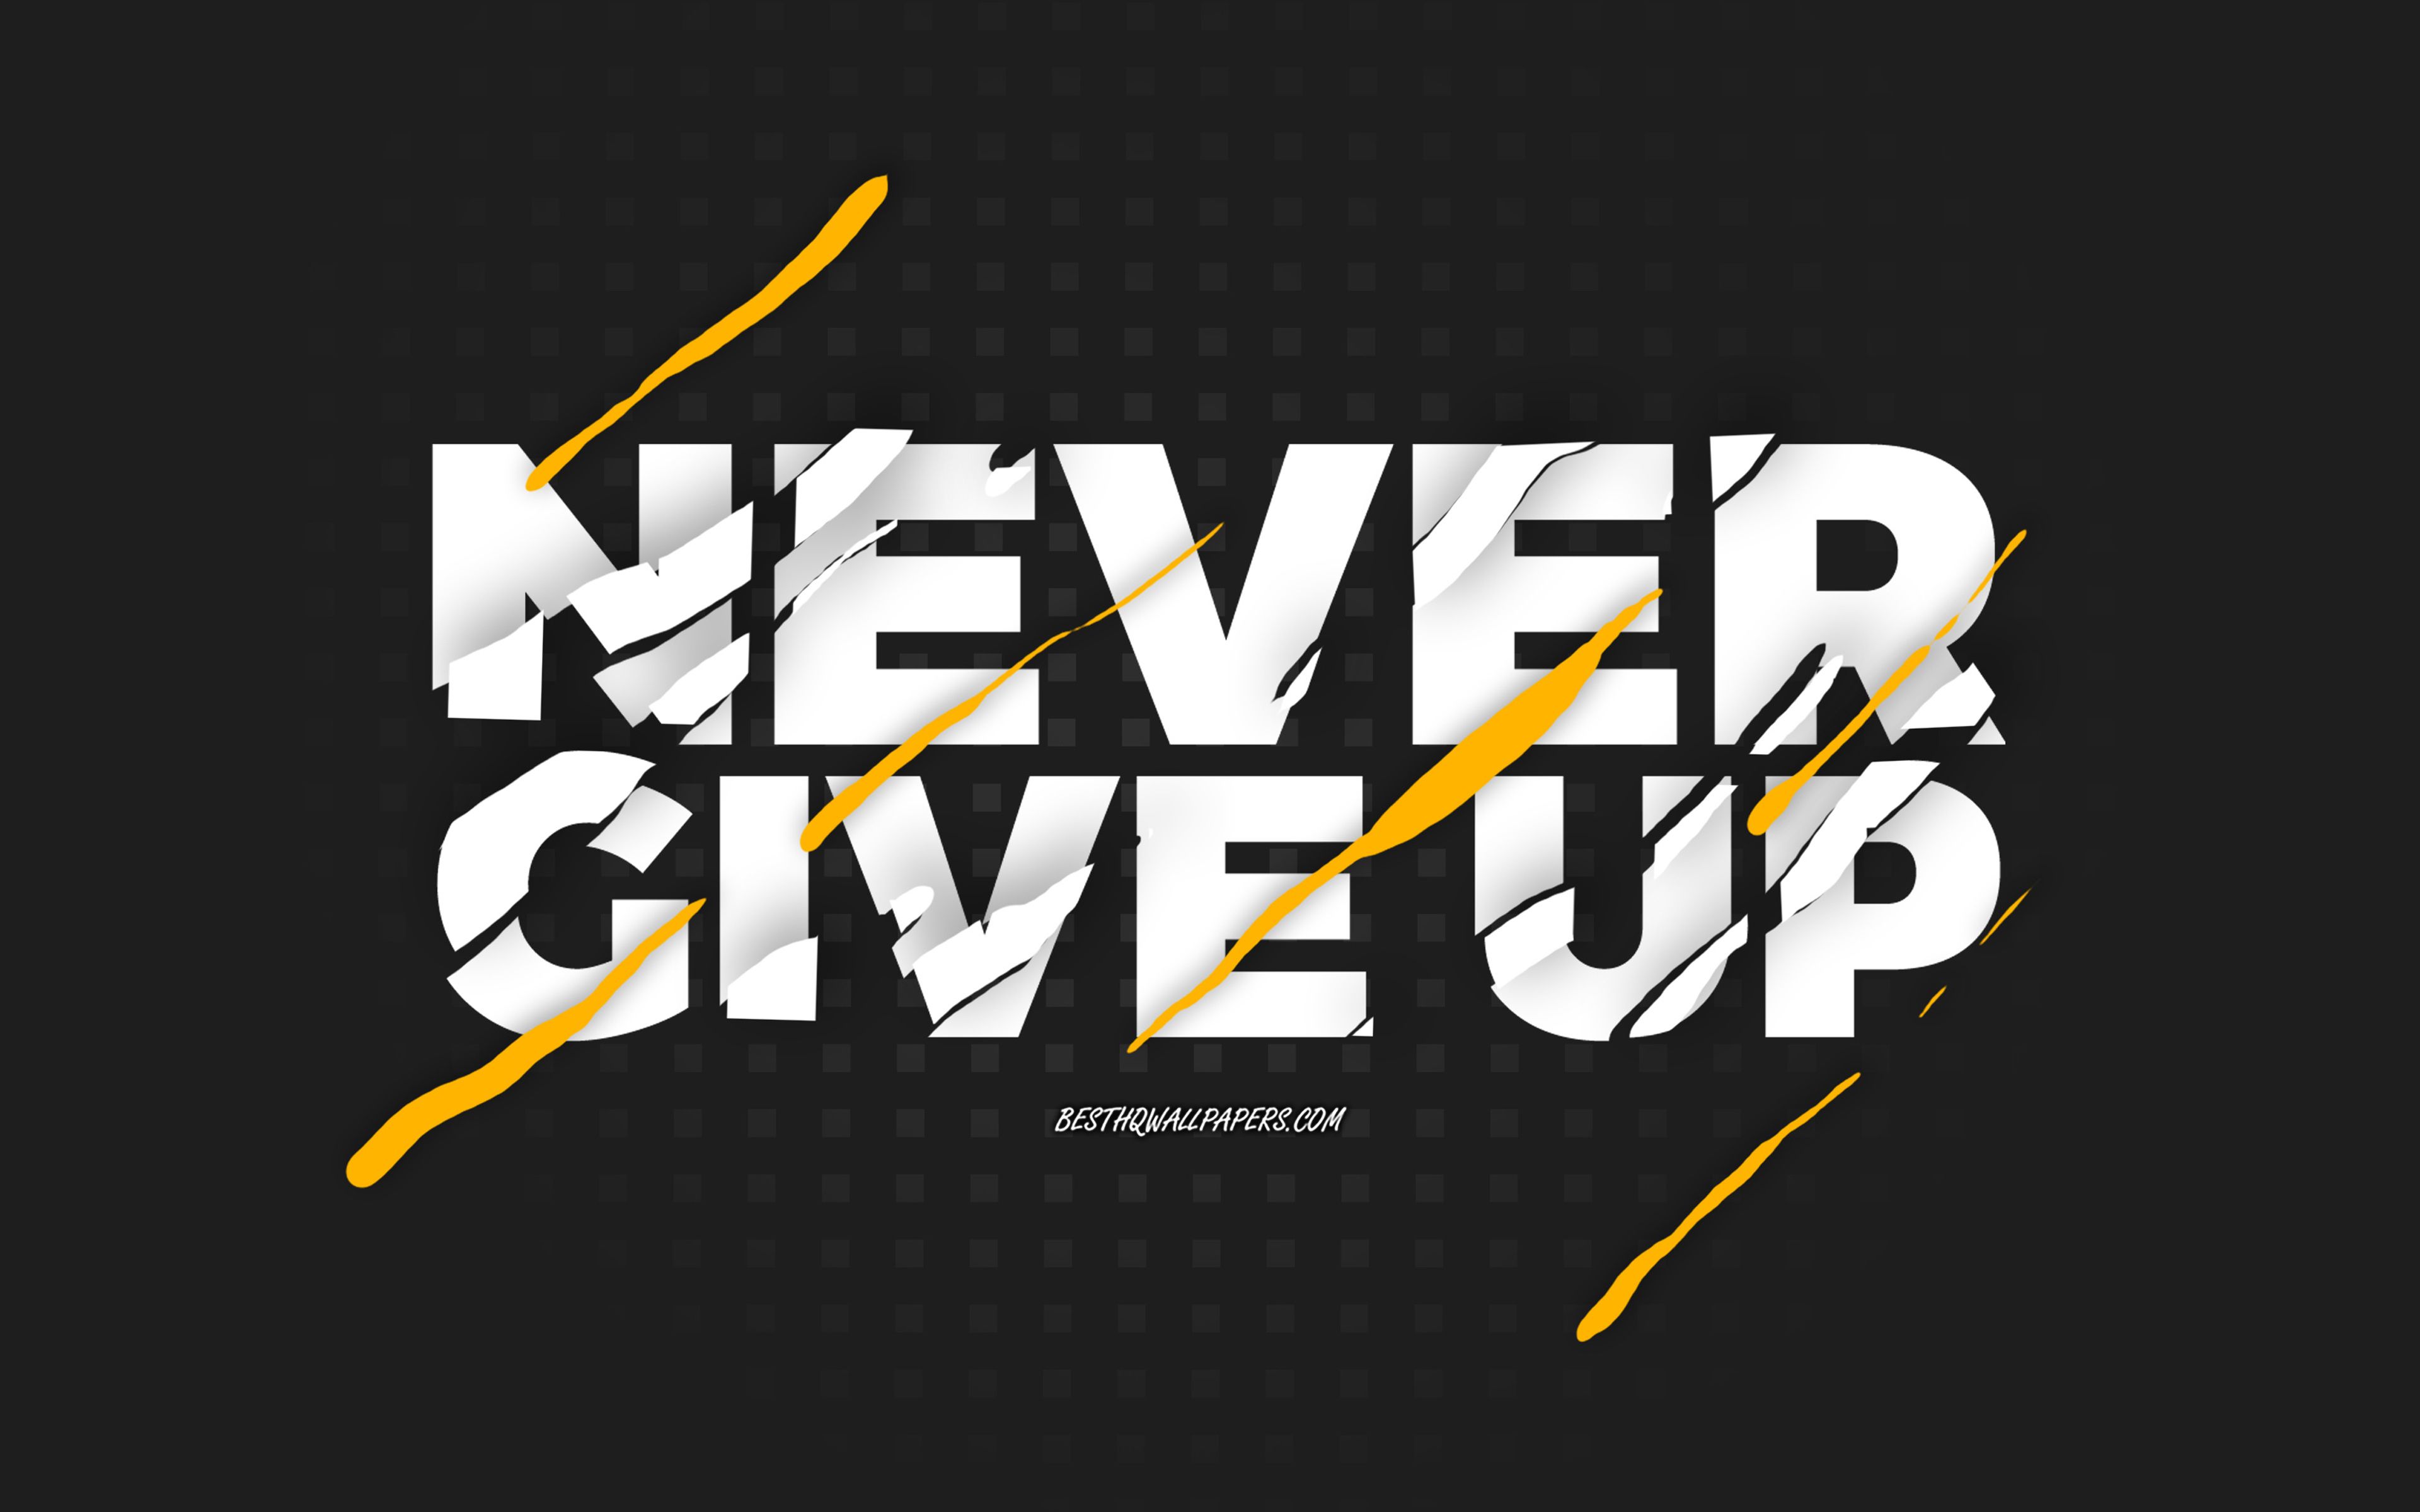 Download wallpaper Never Give Up, black background, creative art, Never Give Up concepts, motivation quotes, inspiration for desktop with resolution 3840x2400. High Quality HD picture wallpaper